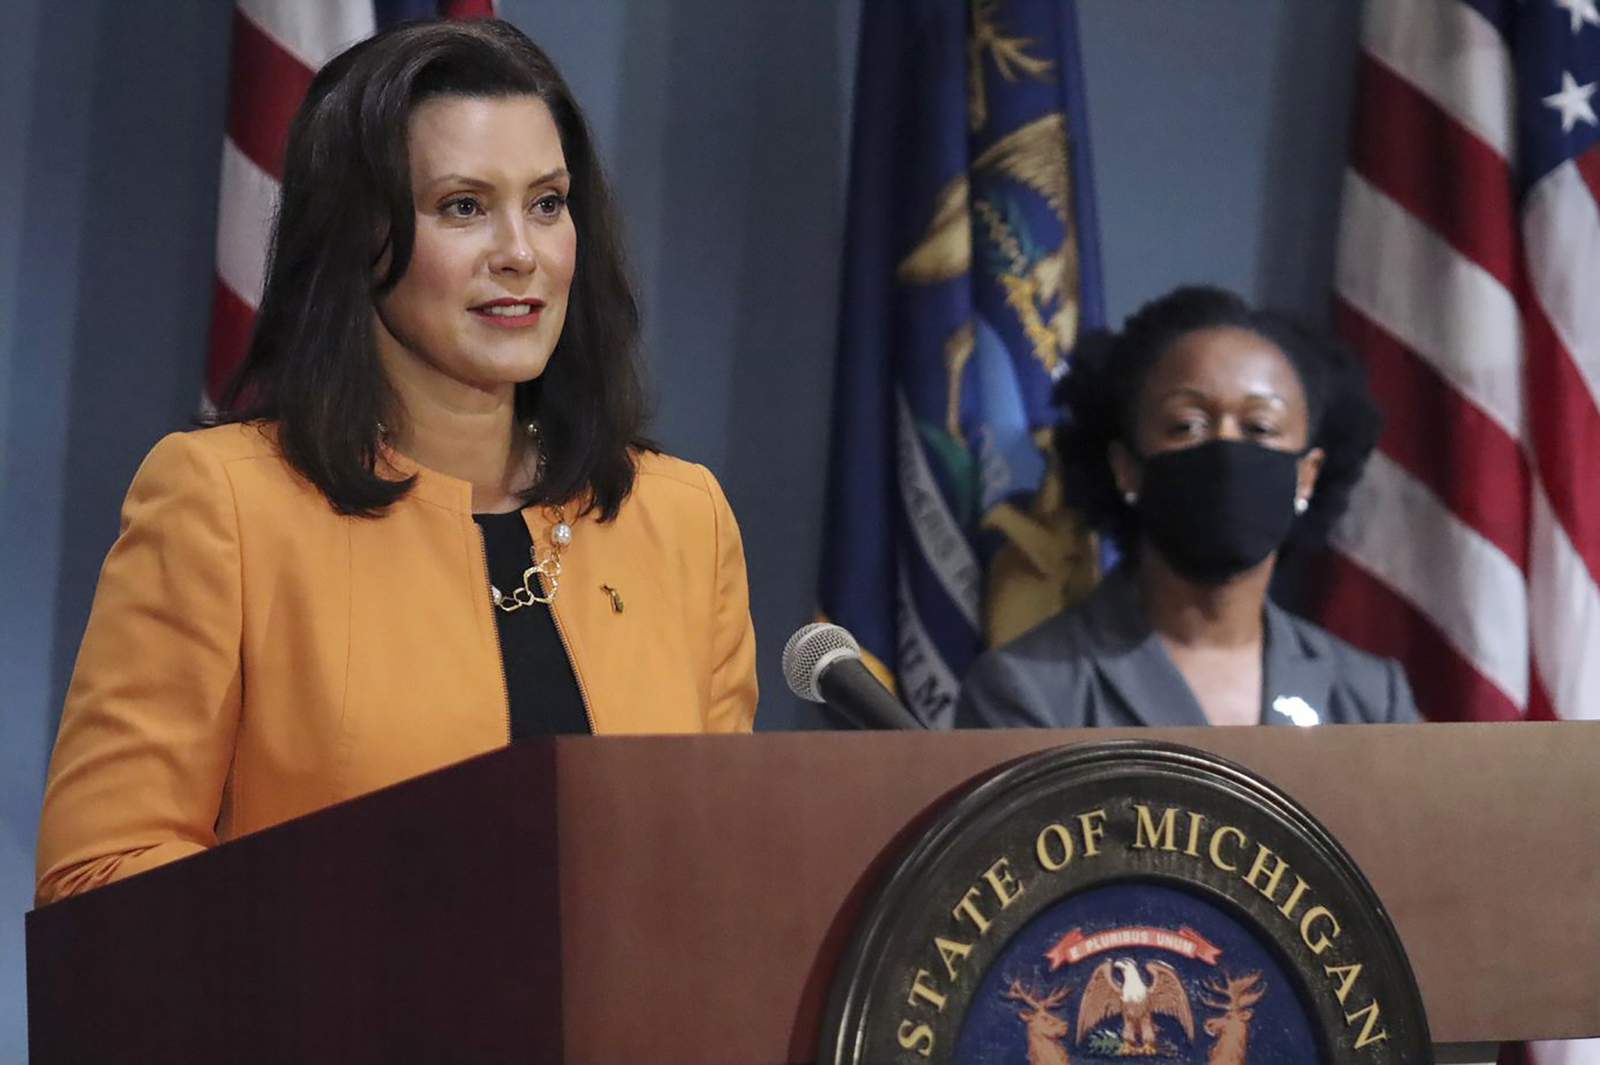 Michigan voters back Whitmer’s COVID response, disapprove of Trump’s, poll shows